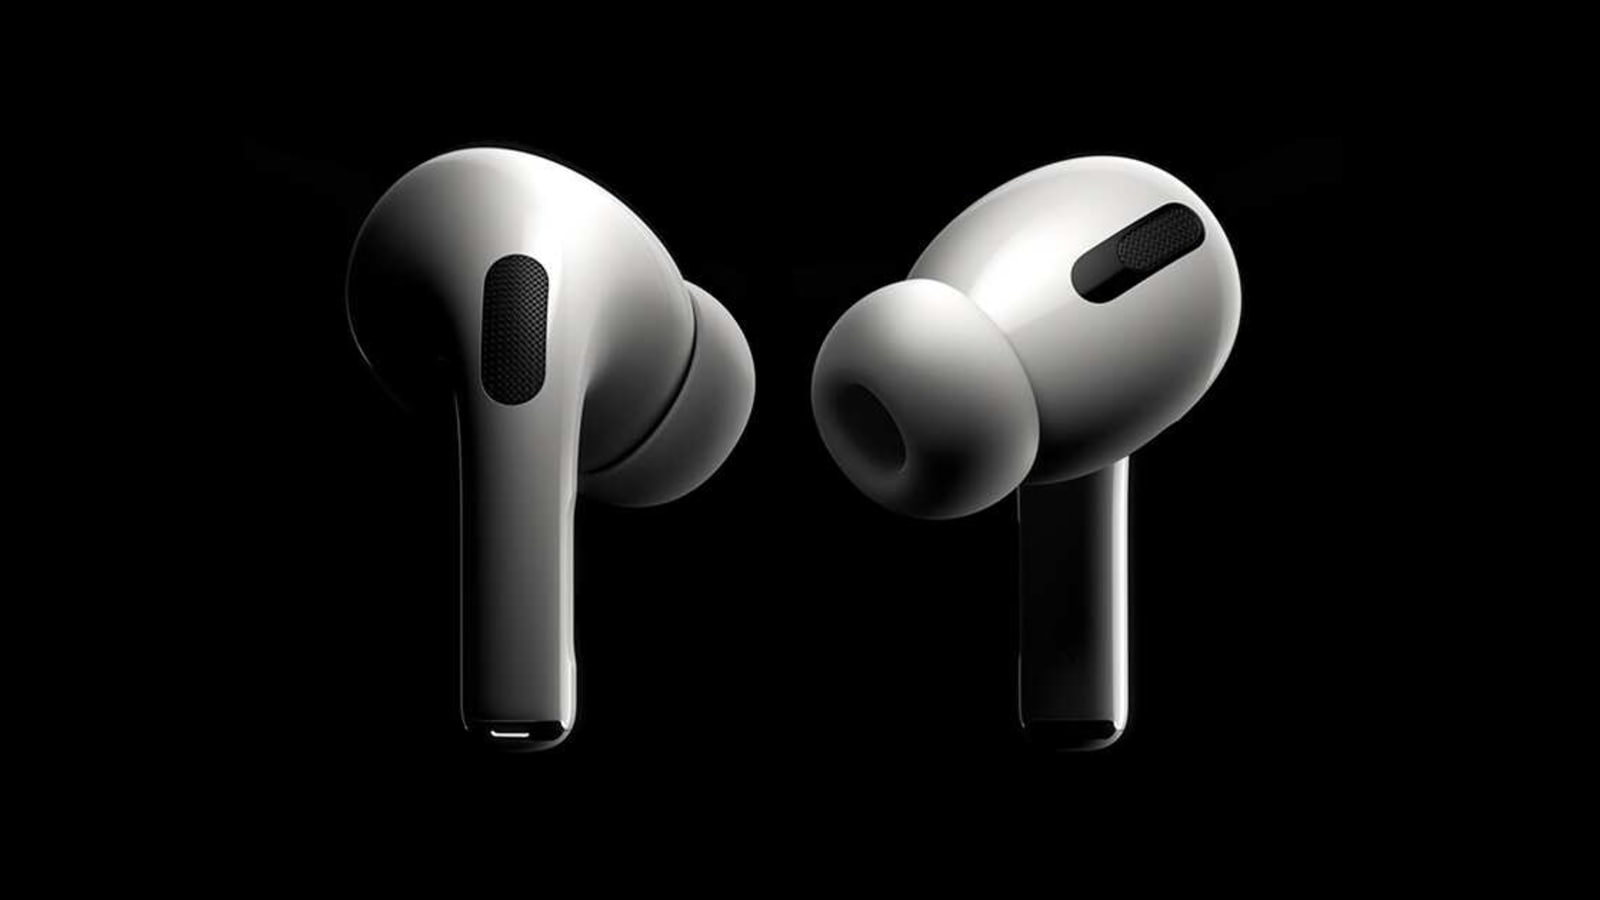 Apple S Upcoming Airpods Pro Will Come In Two Sizes Wearables News